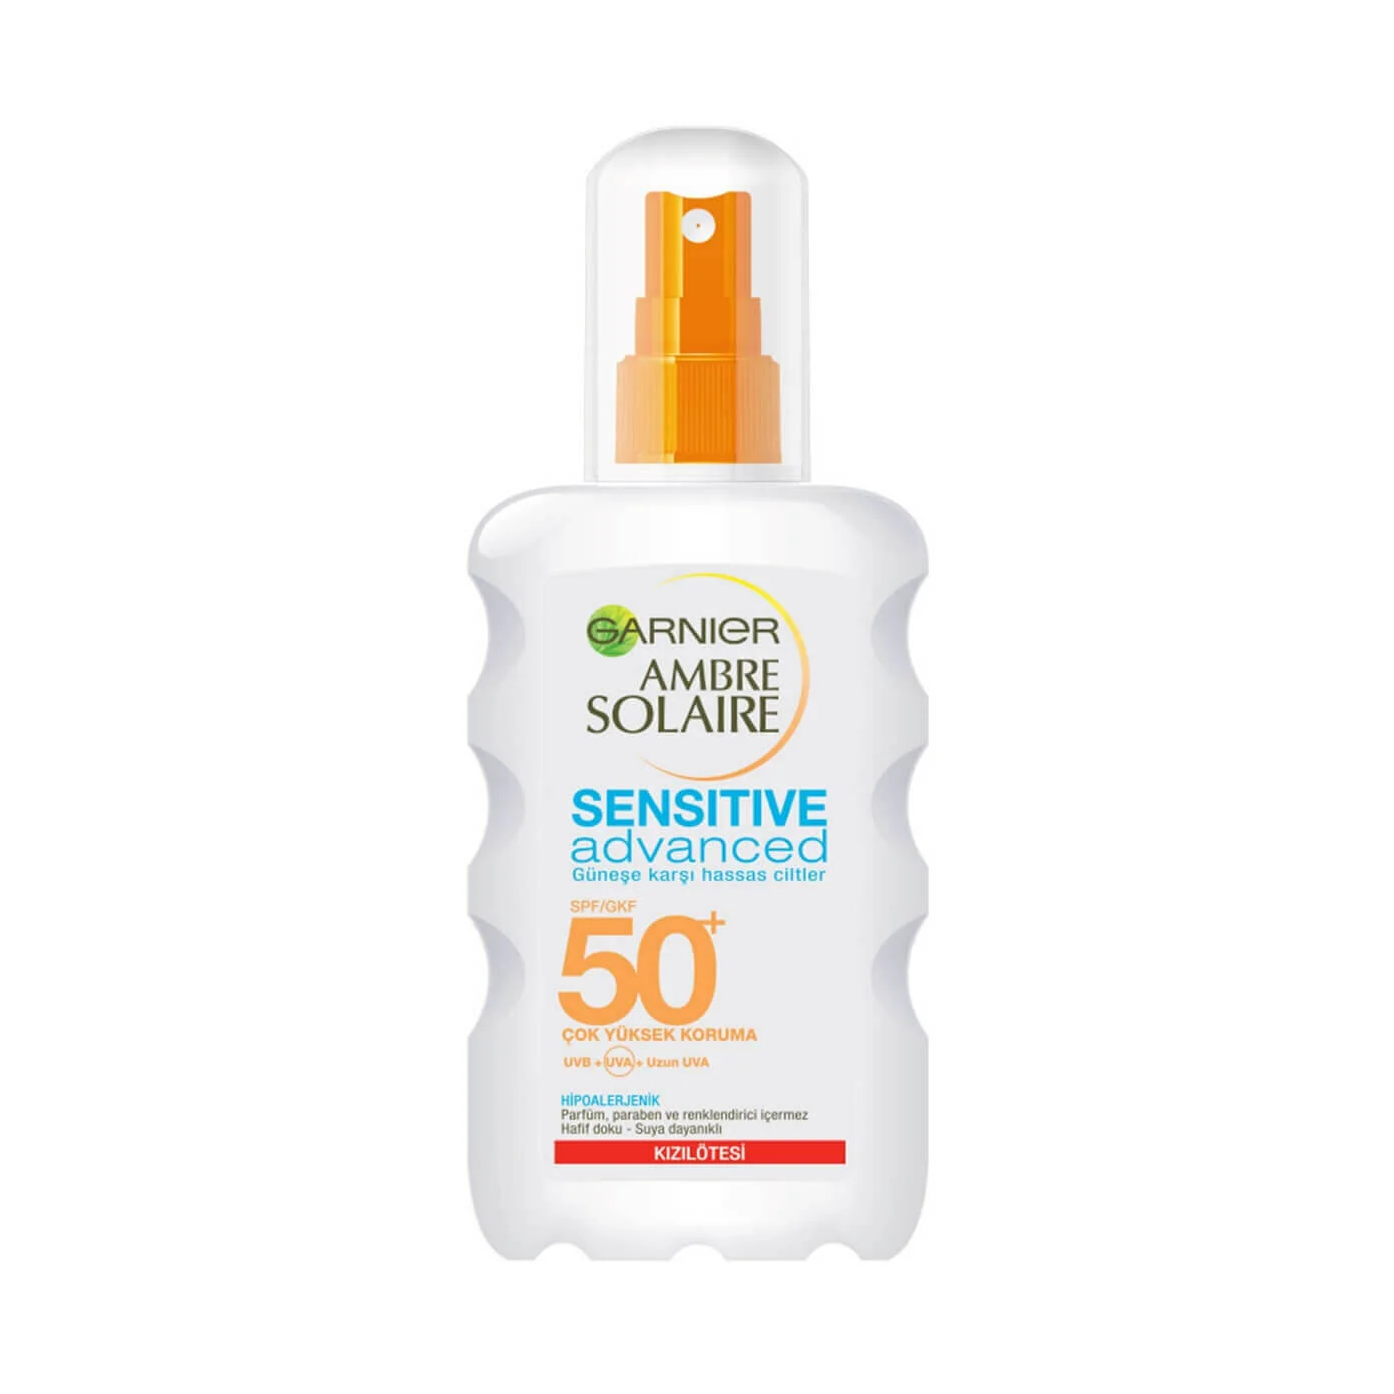 Kiehl's Activated Sun Protector Sunscreen Broad Spectrum SPF 50 Water-Light Lotion for Face and Body